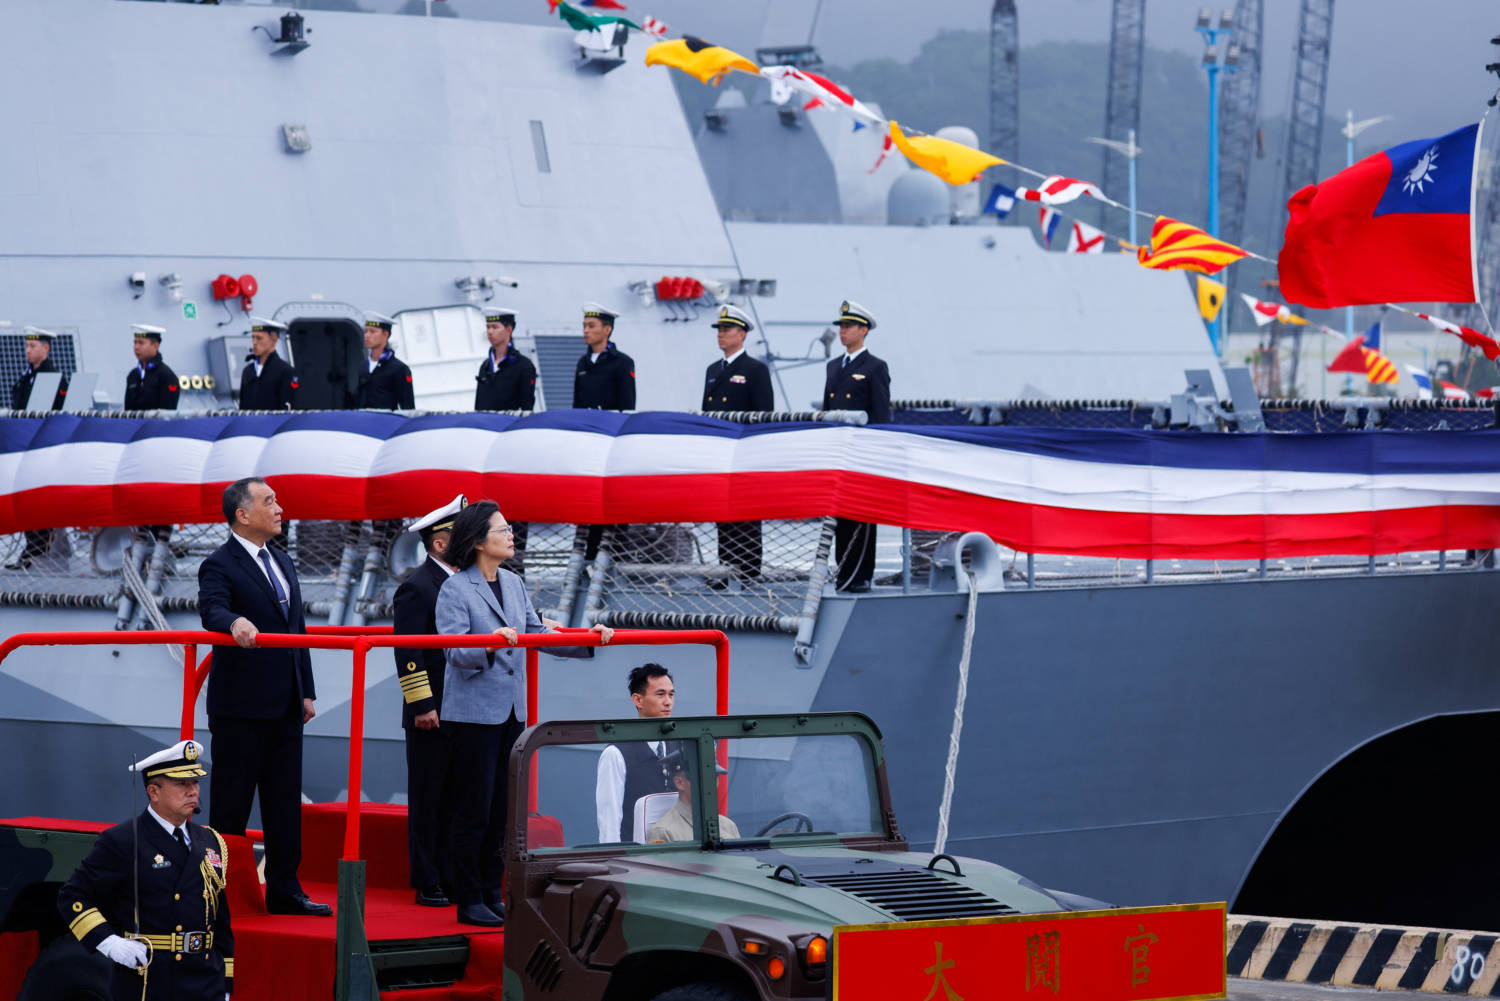 Taiwan President Tsai Ing Wen Attends The Delivery Ceremony Of Six Made In Taiwan Tuo Chiang Class Corvettes At A Port In Yilan